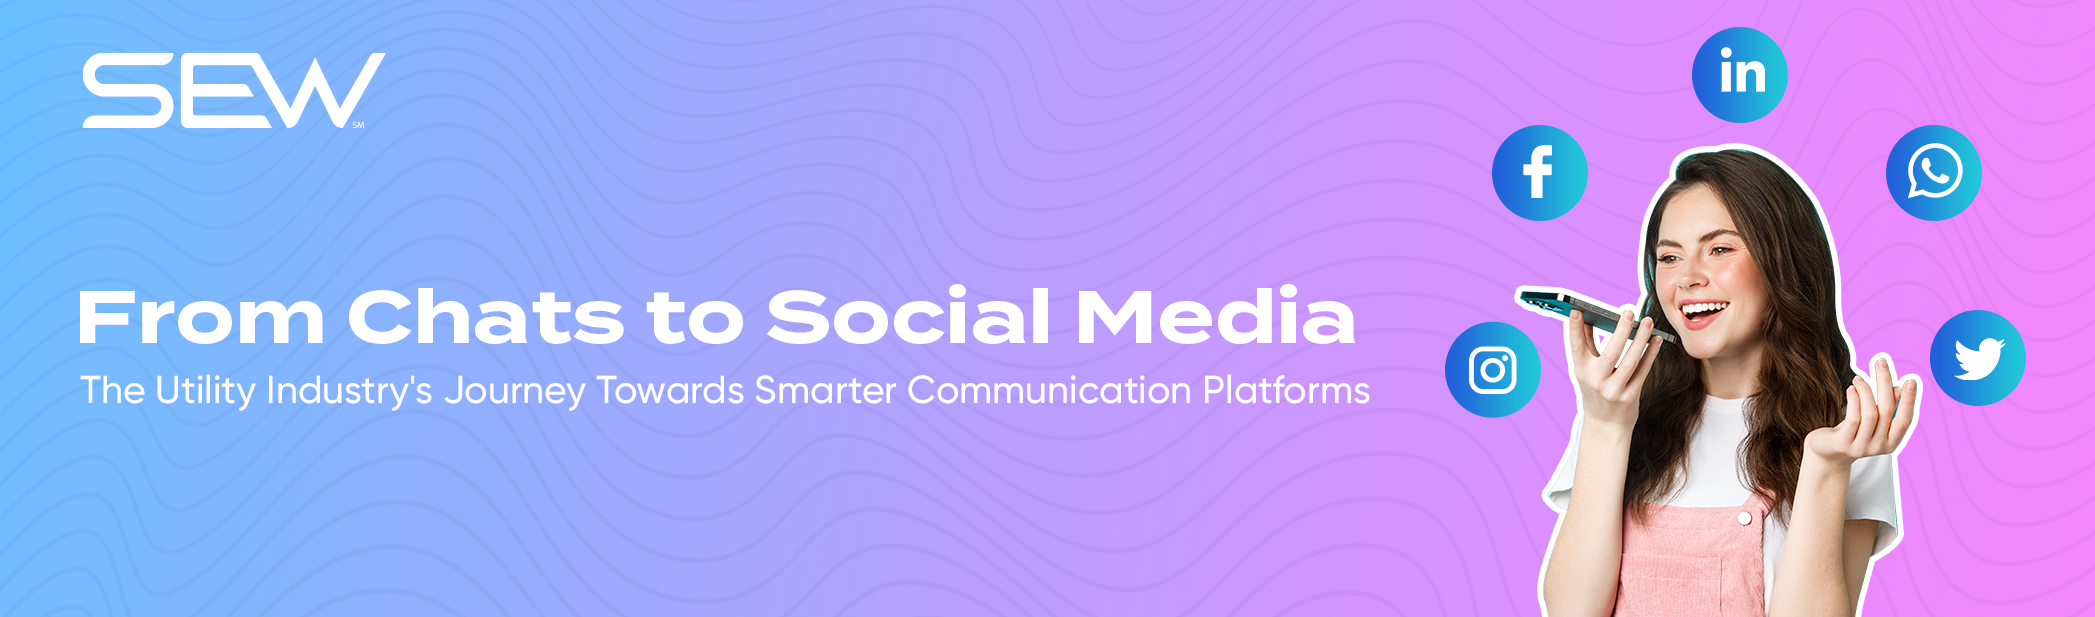 From Chats to Social Media: The Utility Industry's Journey Towards Smarter Communication Platforms